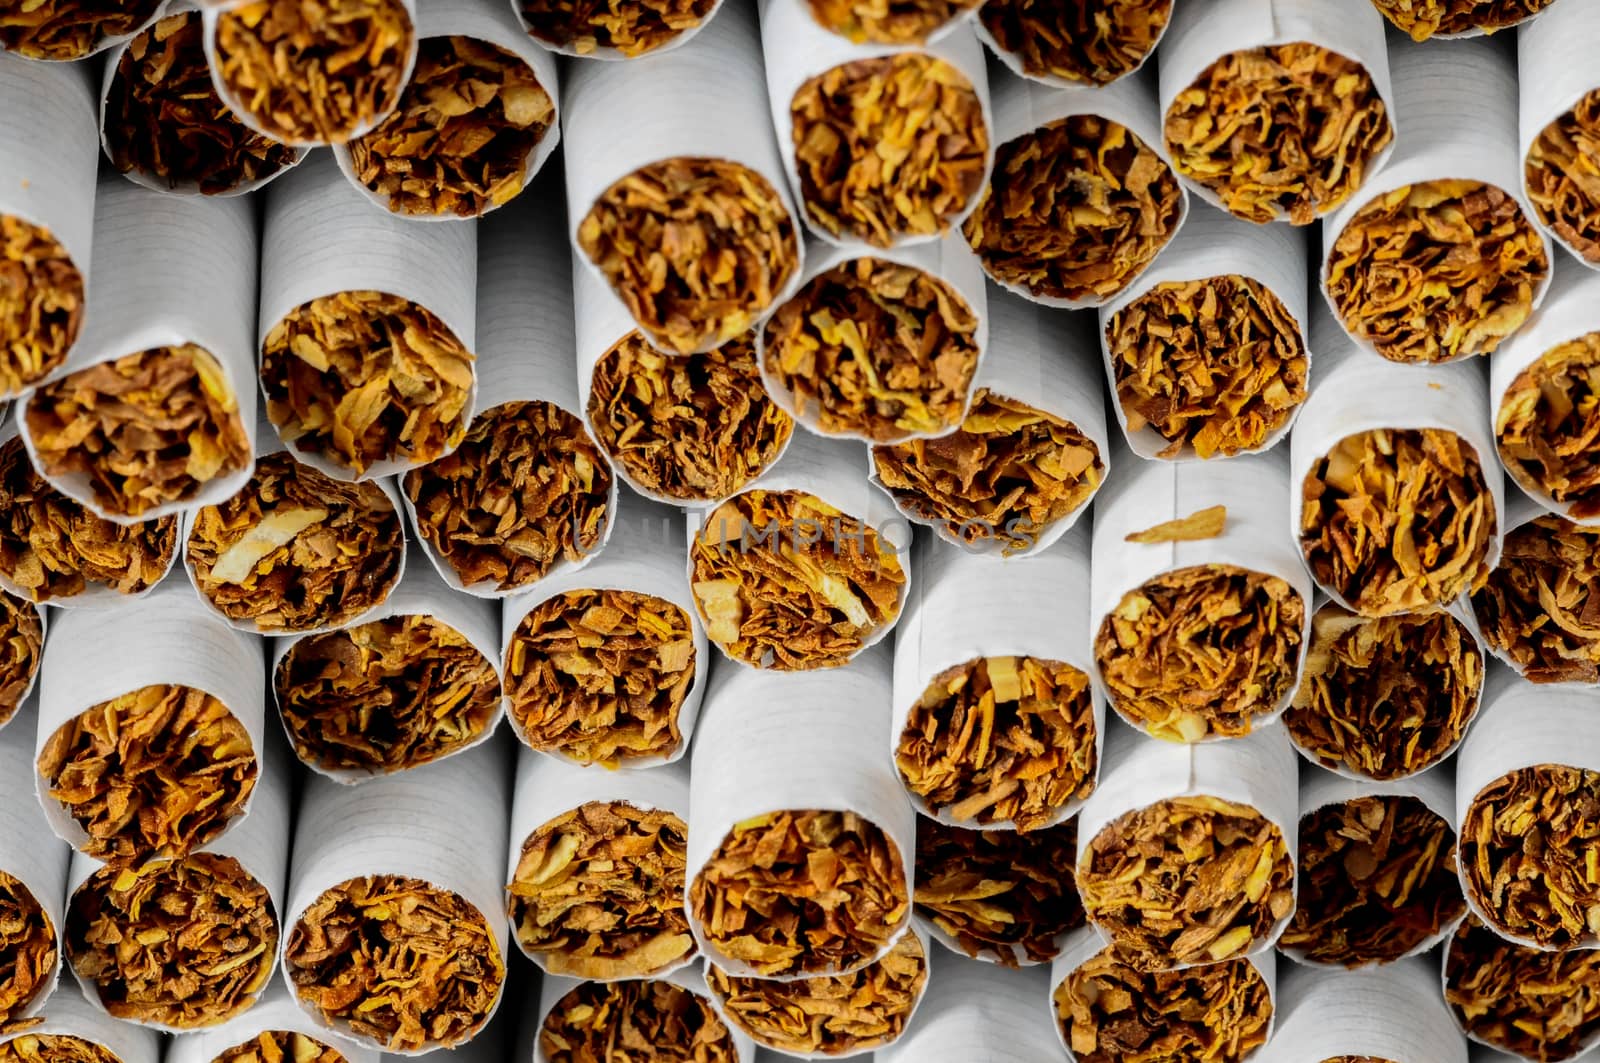 Close-up of Tobacco Cigarettes Background or texture